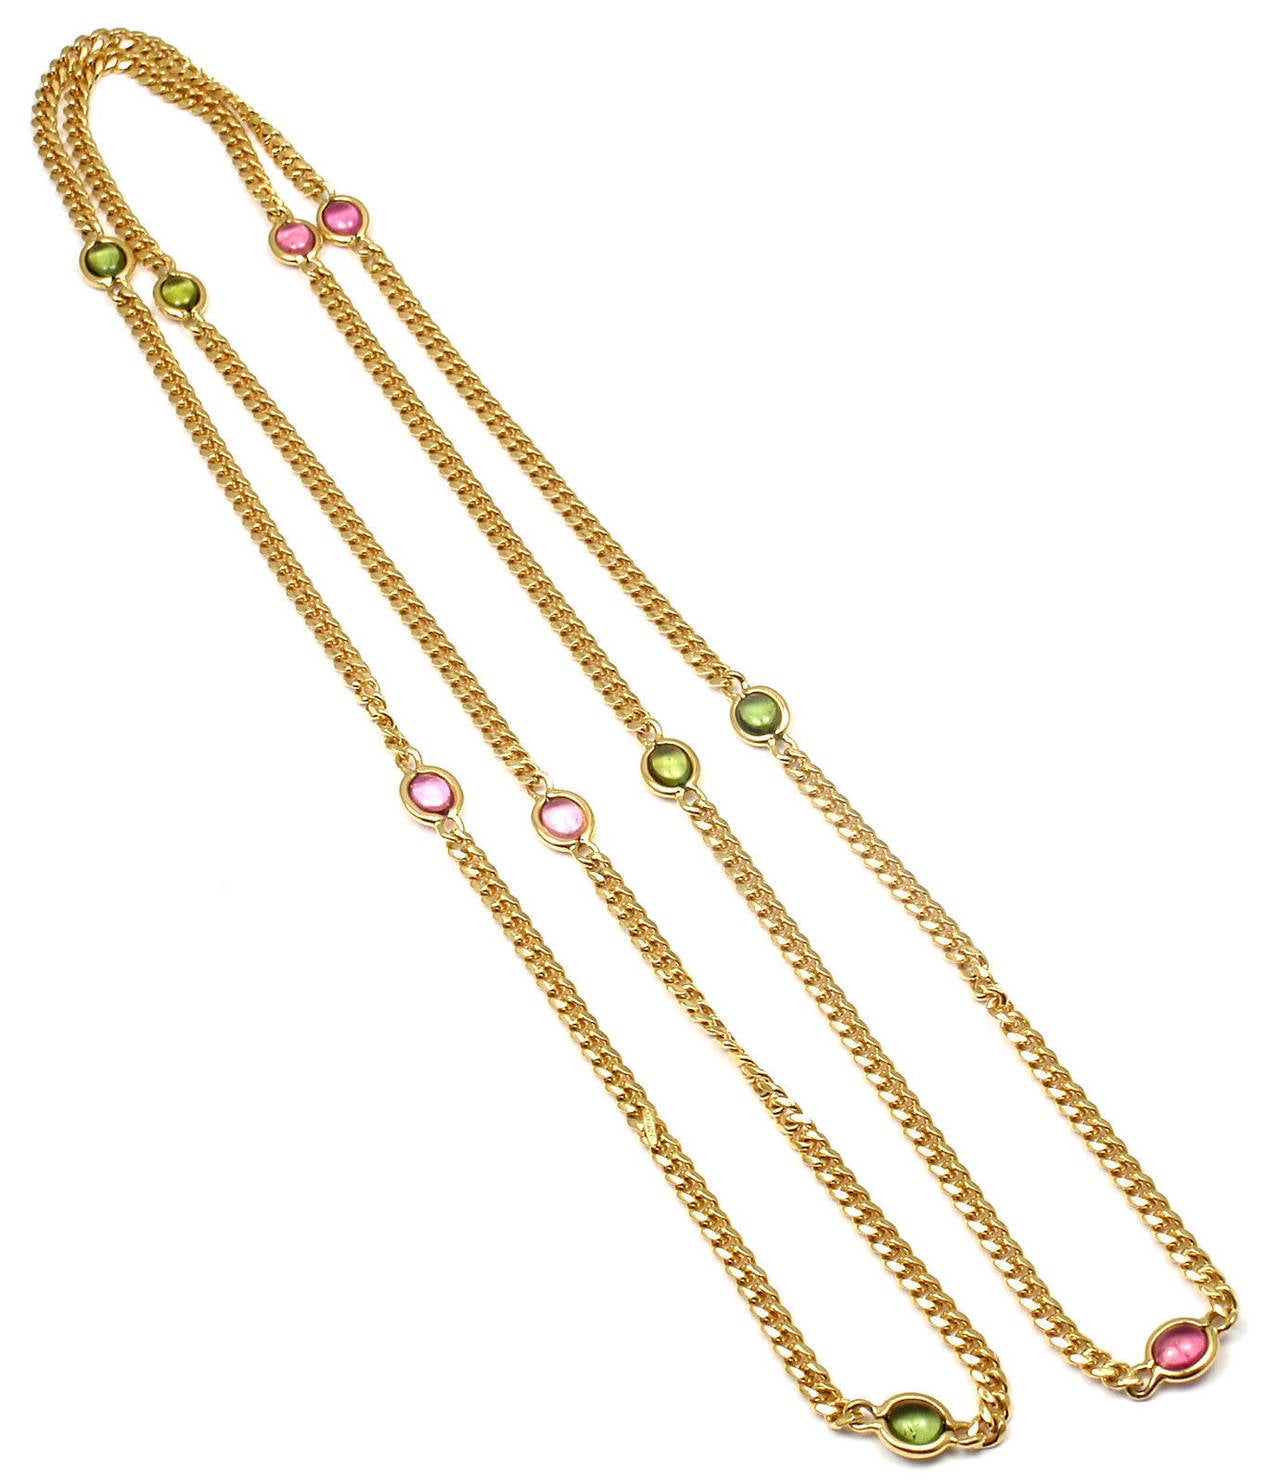 Women's Tiffany & Co. Pink and Green Tourmaline Gold 35 Inch Link Necklace